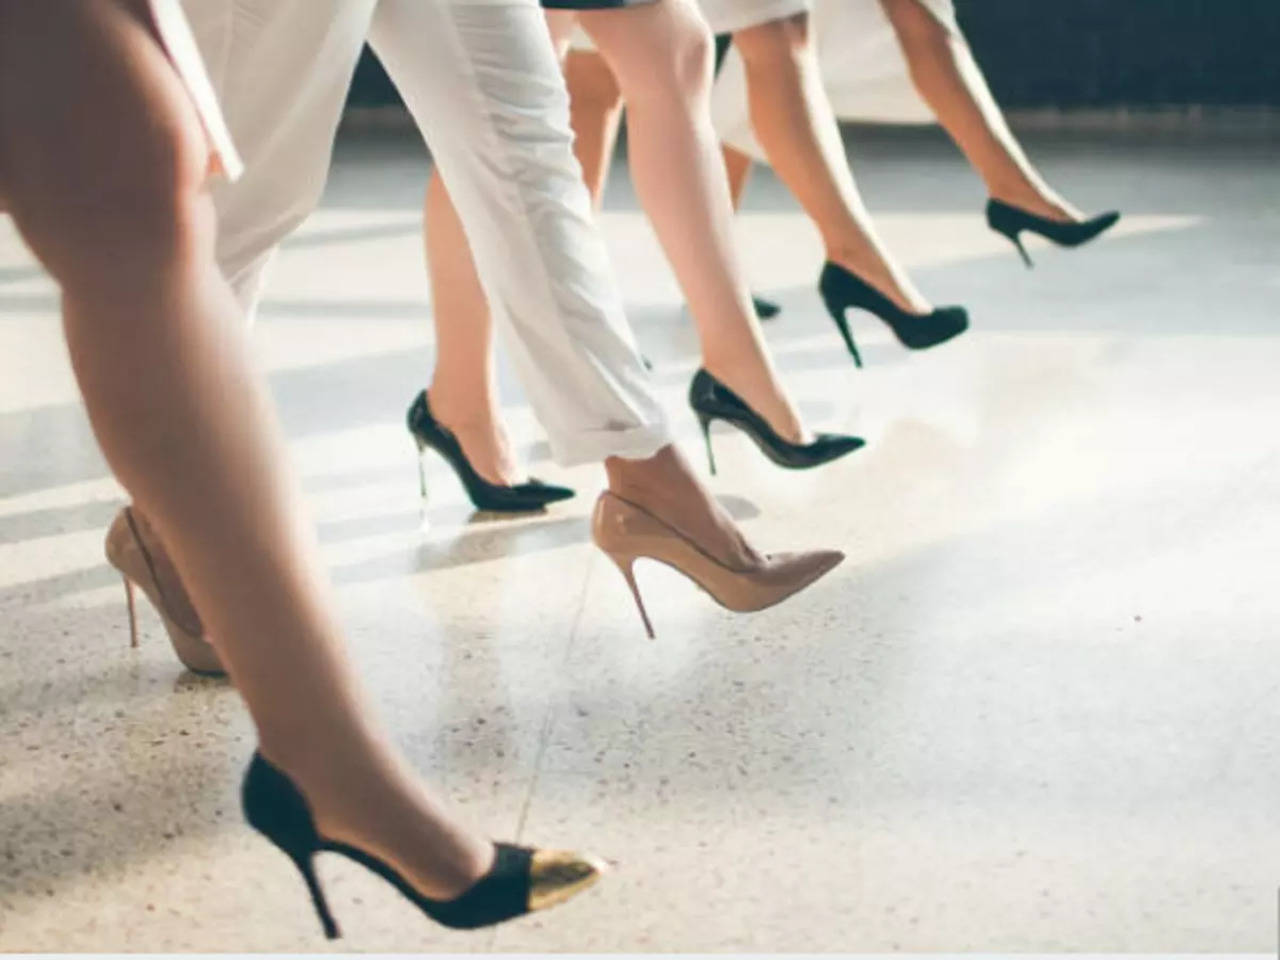 In love with heels? Here are some tips for you - Times of India